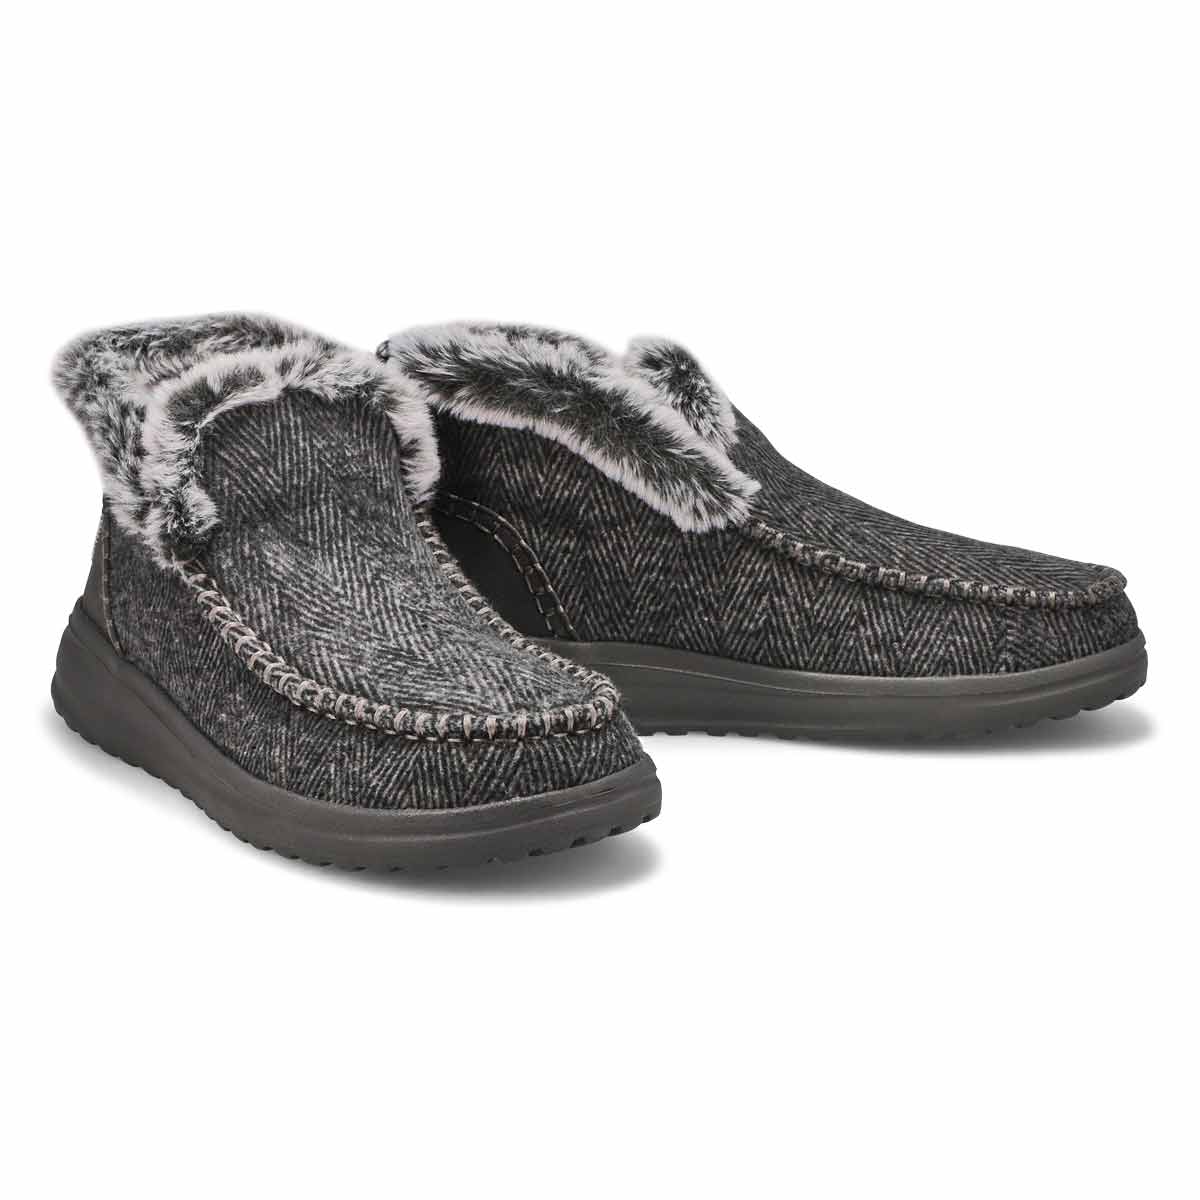 HEYDUDE Women's Denny Slip On Ankle Boot - Bl | SoftMoc.com